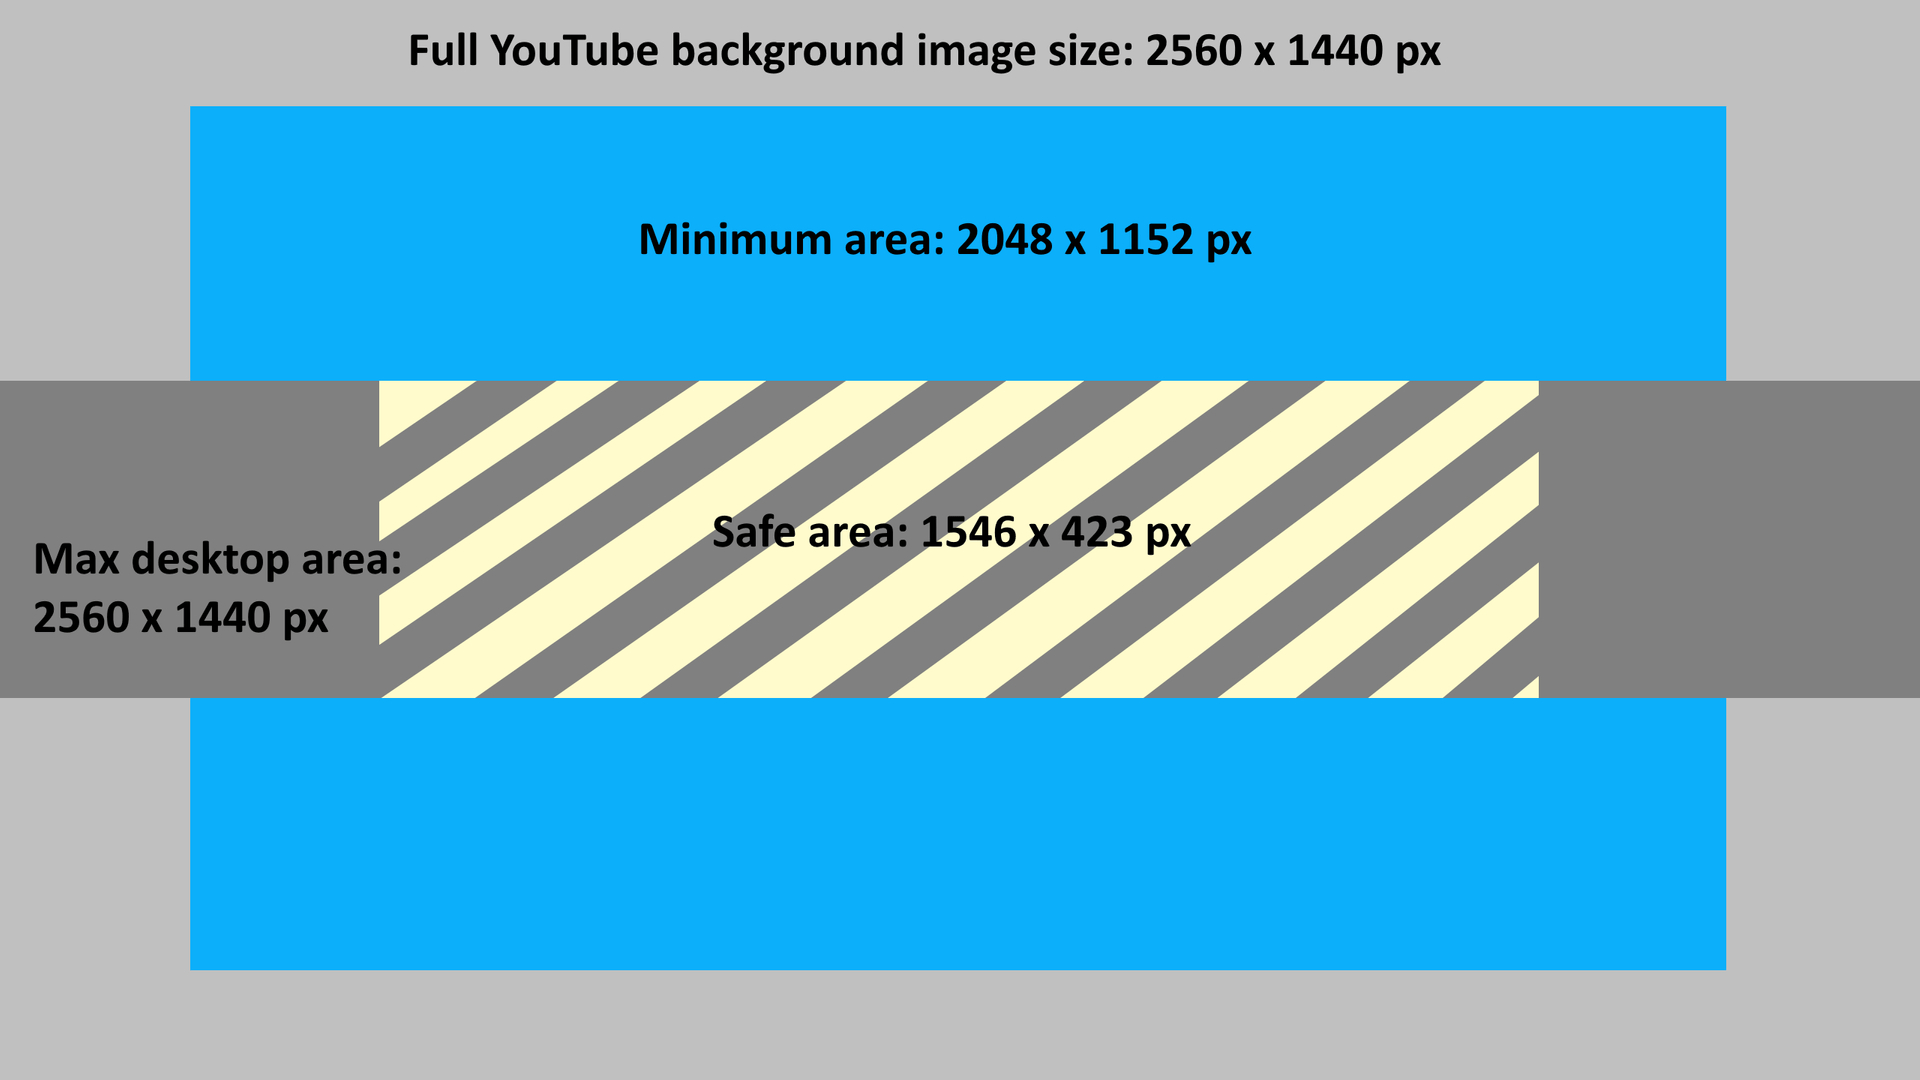 The Best Youtube Banner Size In 2020 + Best Practices For With Regard To Youtube Banner Template Size